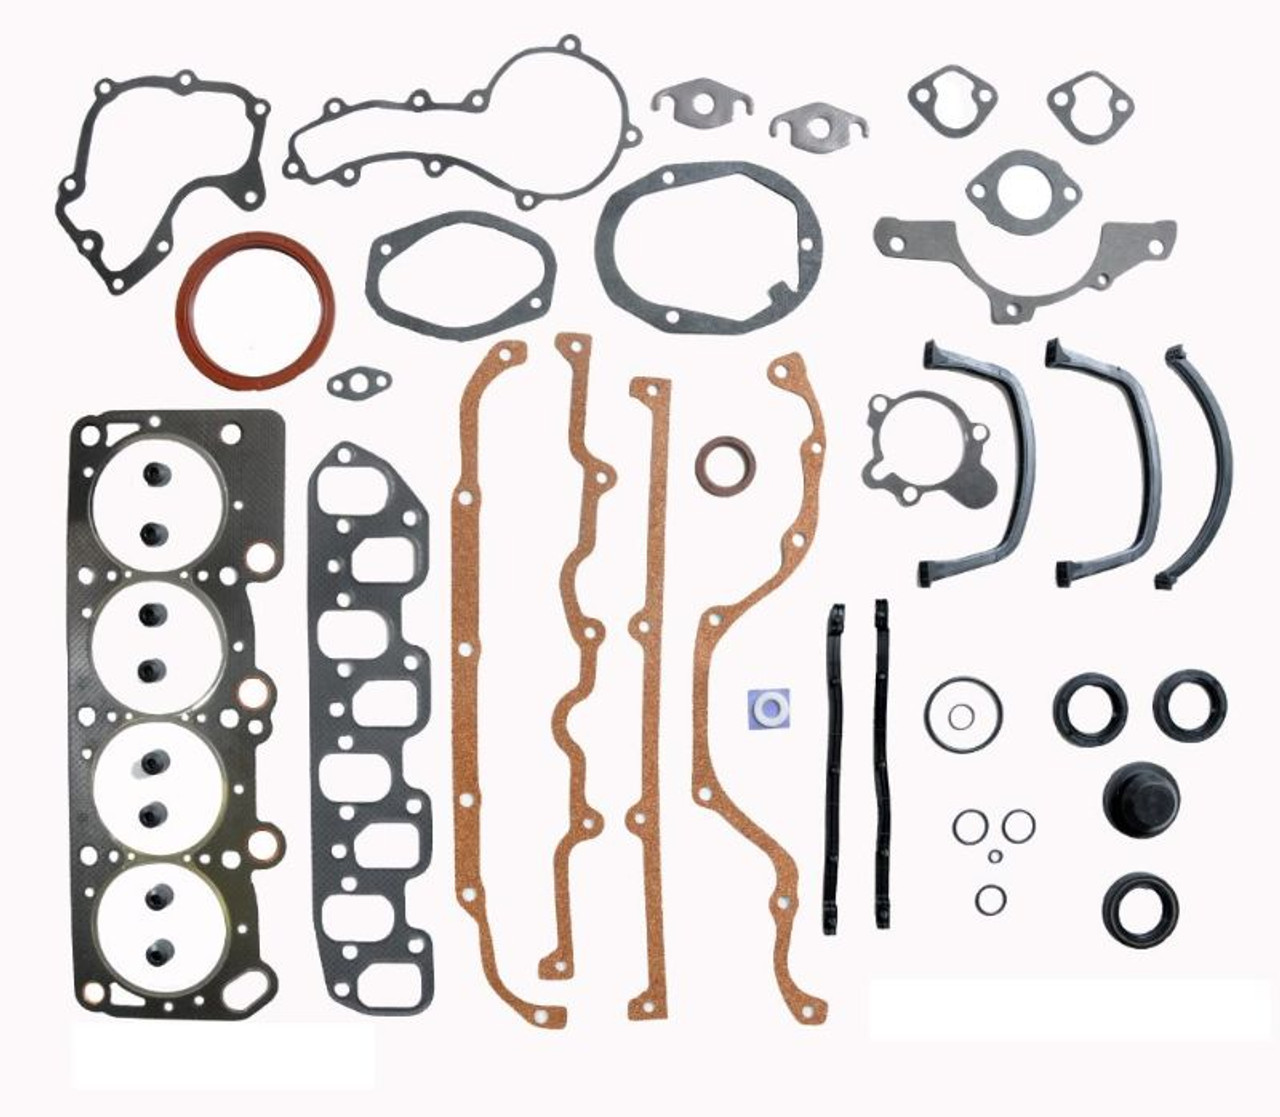 1986 Chrysler Town & Country 2.5L Engine Gasket Set CR2.5-17 -4